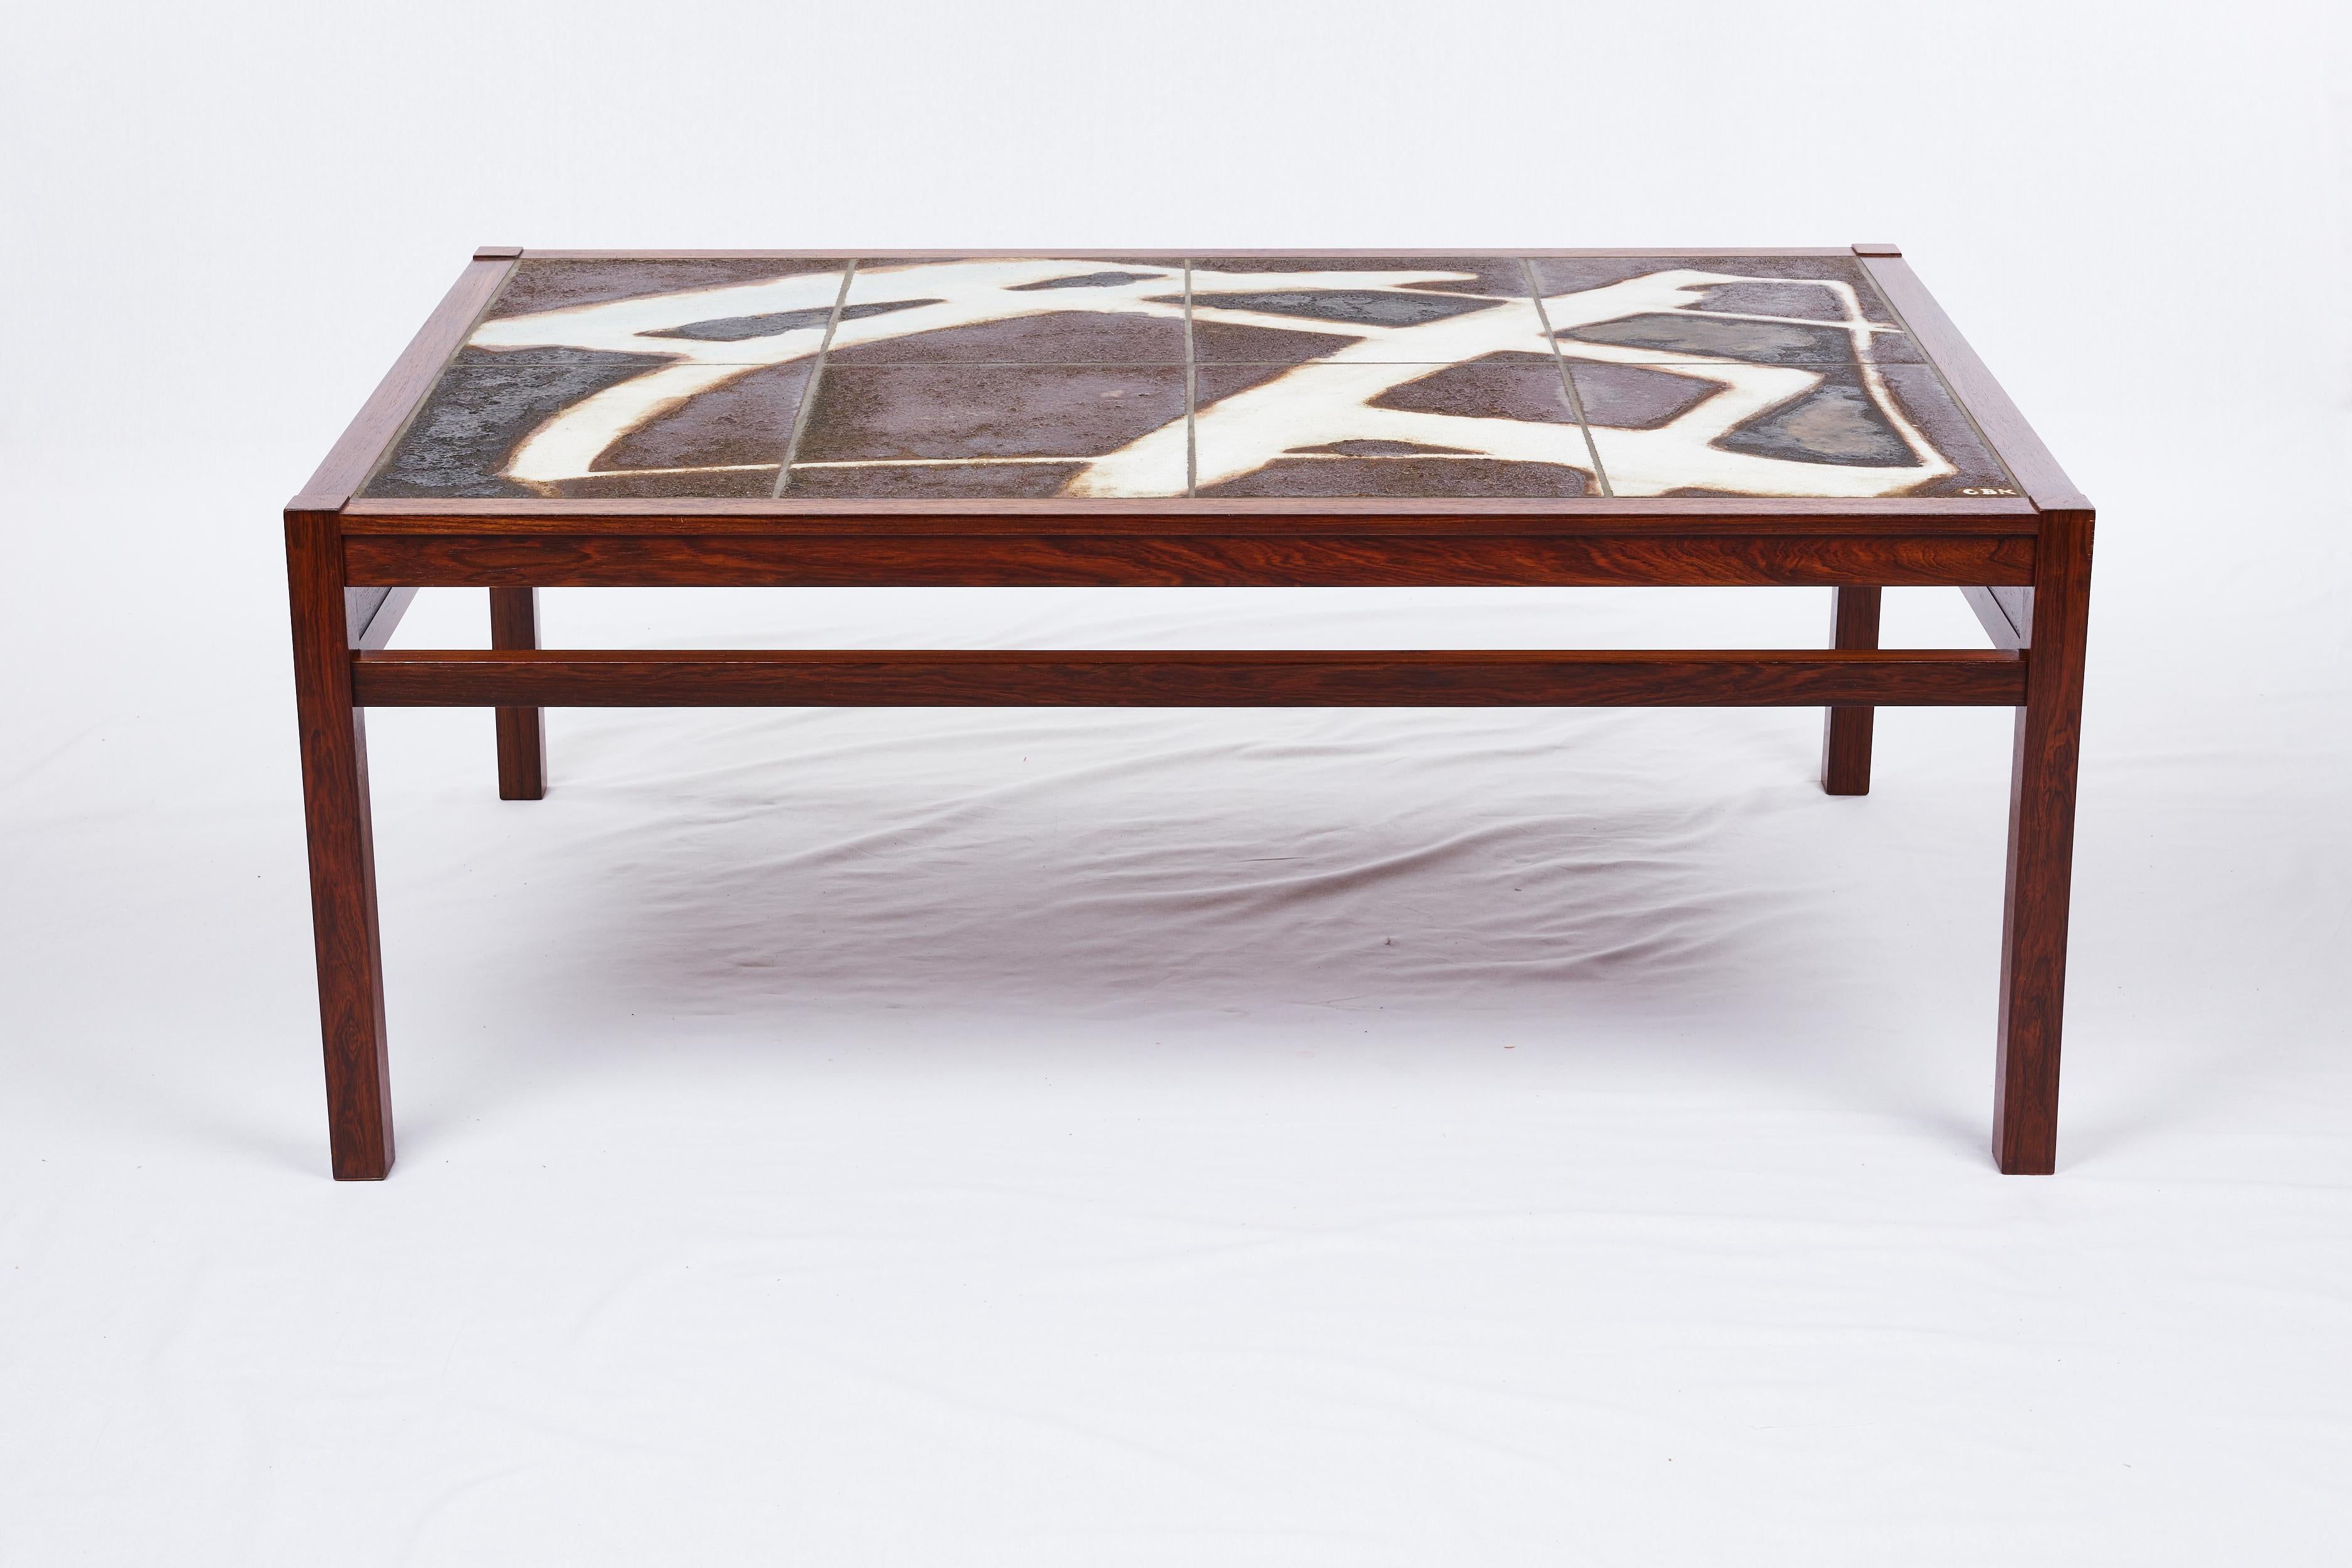 Ole Bjorn Kruger Tile coffee table. Fabulous Abstract Artwork. We can trim the legs if you would like the table lower.